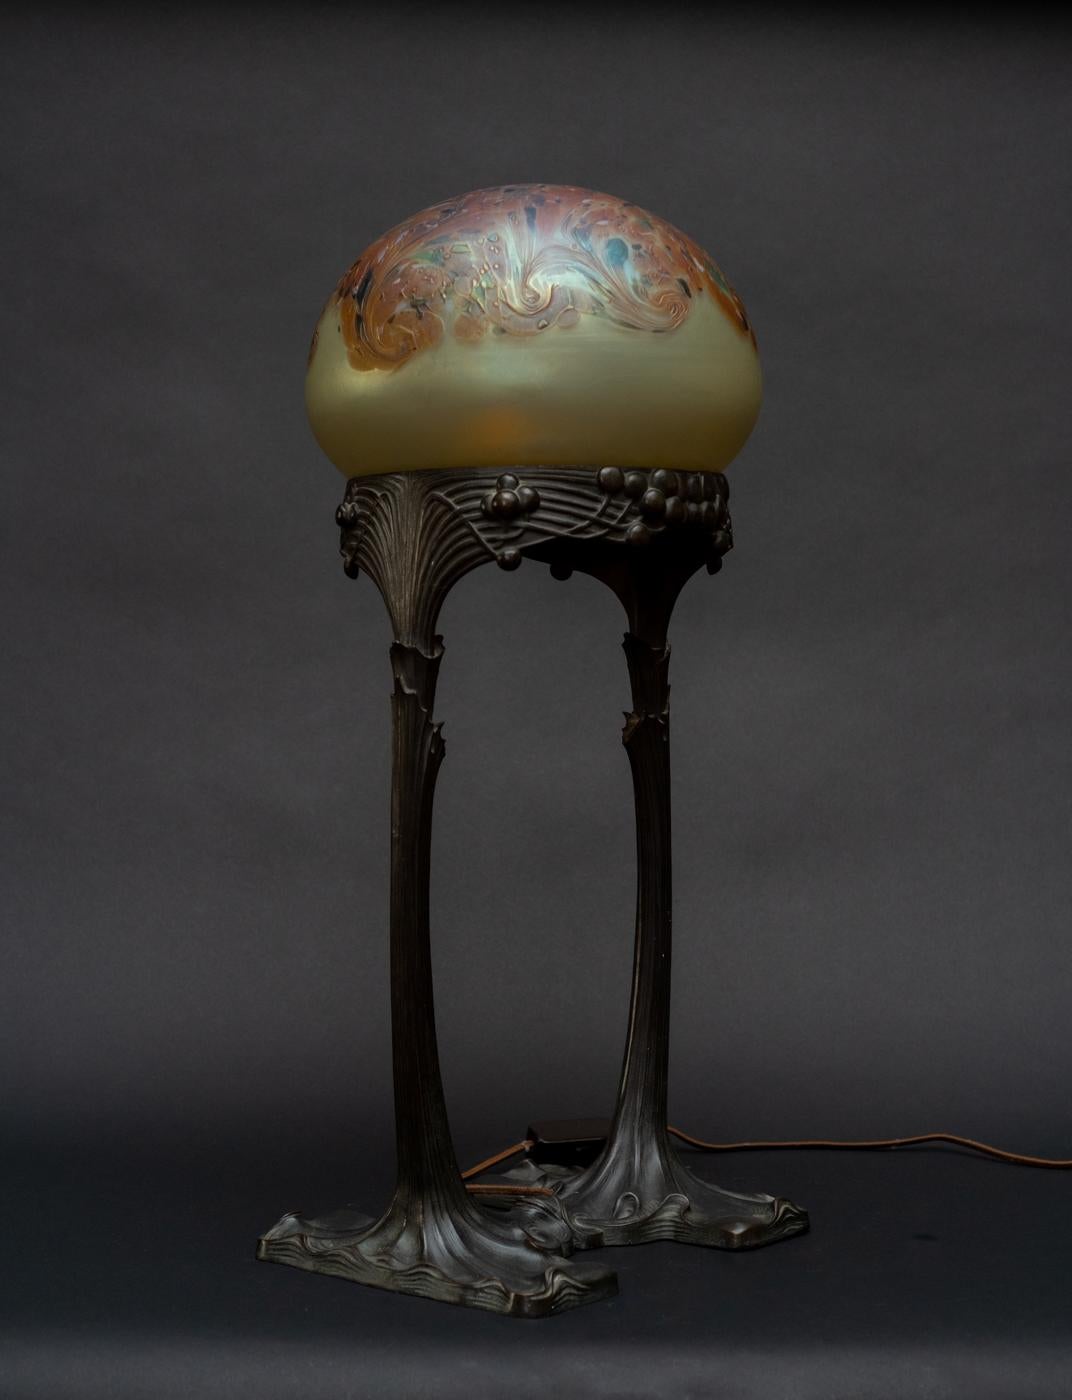 ART NOUVEAU BALLOON GLASS TABLE LAMP, by Gustav Gurschner and Johann Loetz Witwe, c. 1904, the glass dome in a frosted yellow iridescent ground is crowned by orange abstract swirls accented by dabs of aubergine and green; it rests on a chocolate